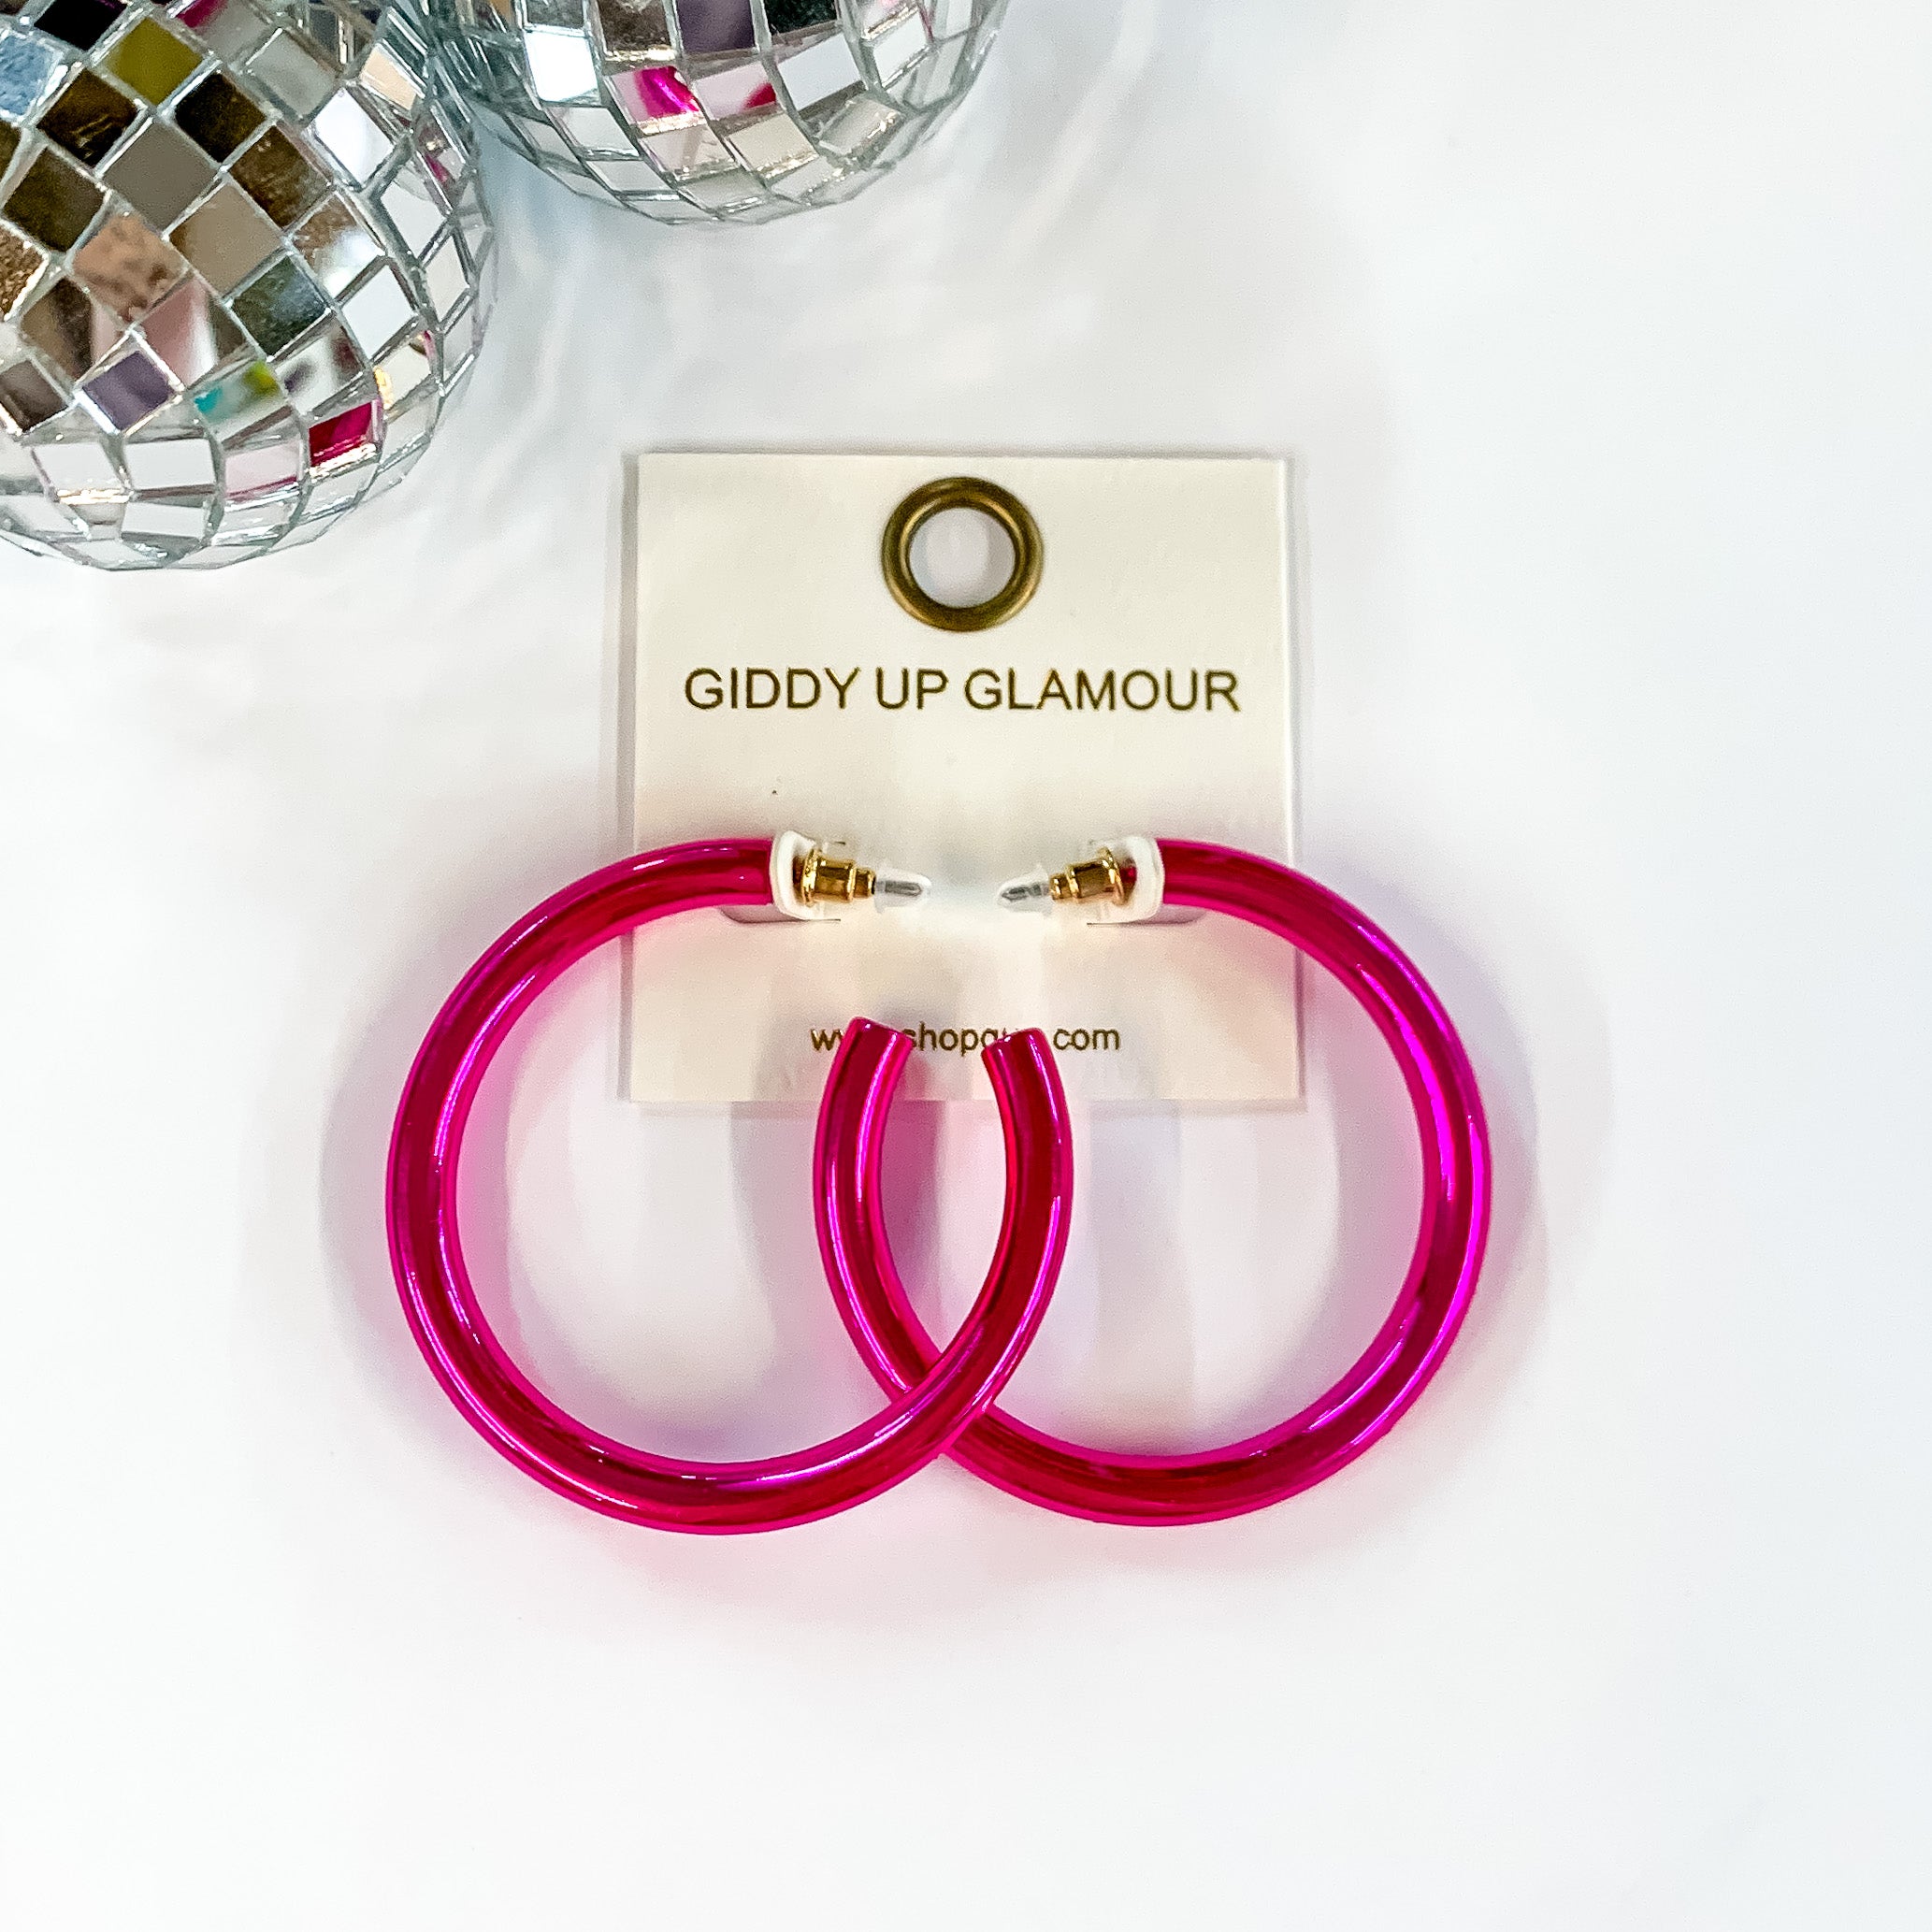 Light up Large Neon Hoop Earrings in Hot Pink. Pictured on a white background with disco balls in the top left corner.